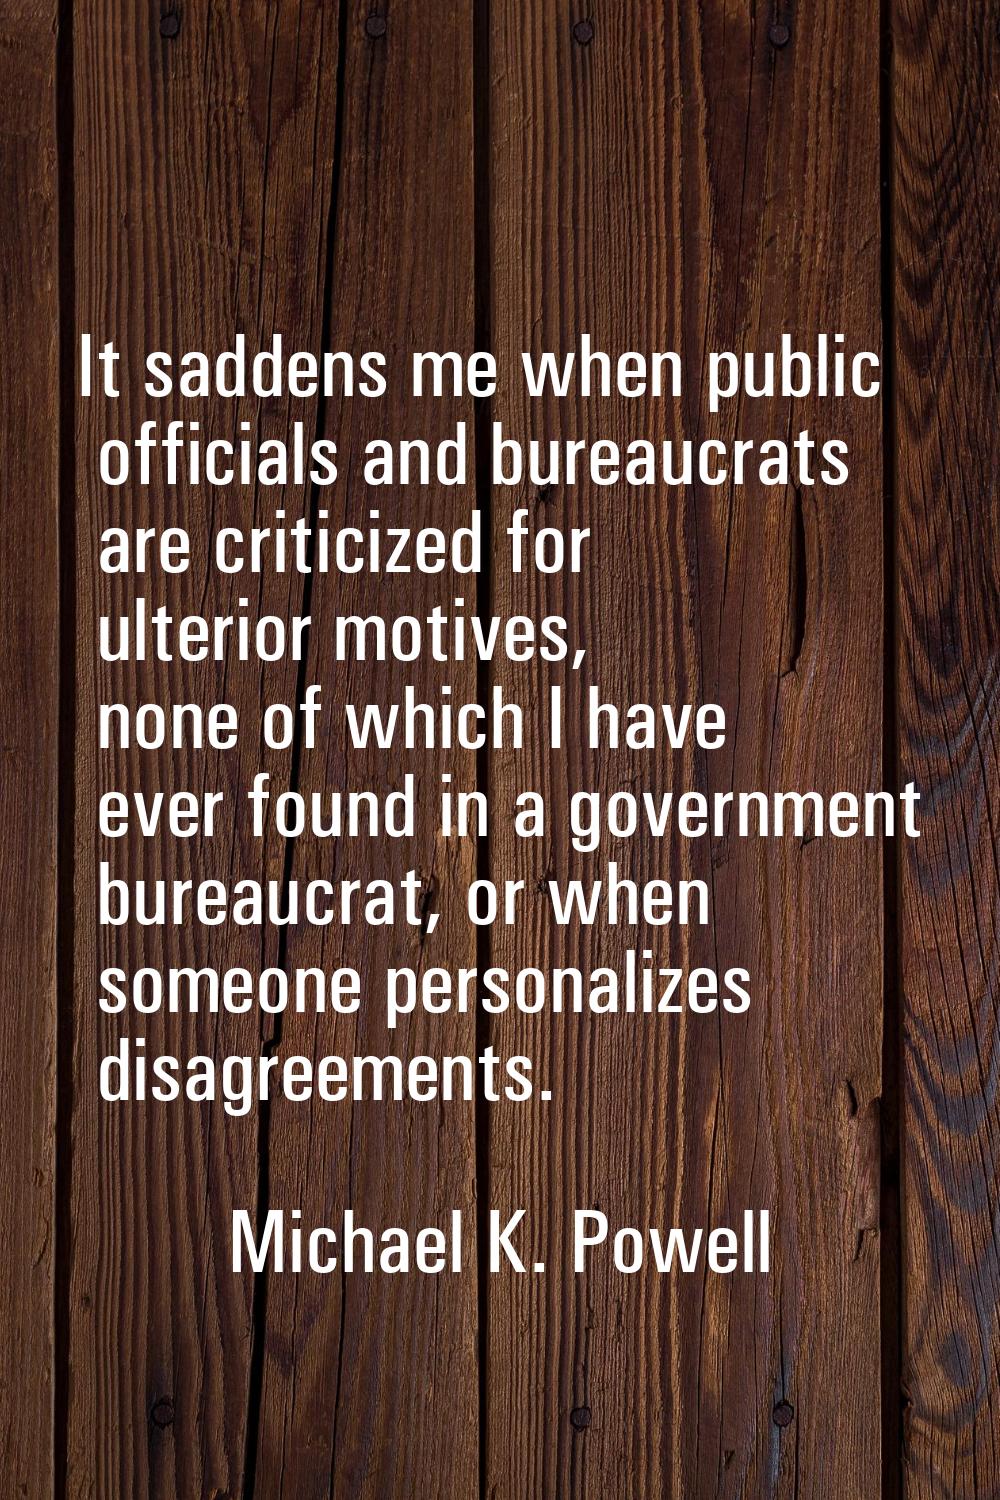 It saddens me when public officials and bureaucrats are criticized for ulterior motives, none of wh